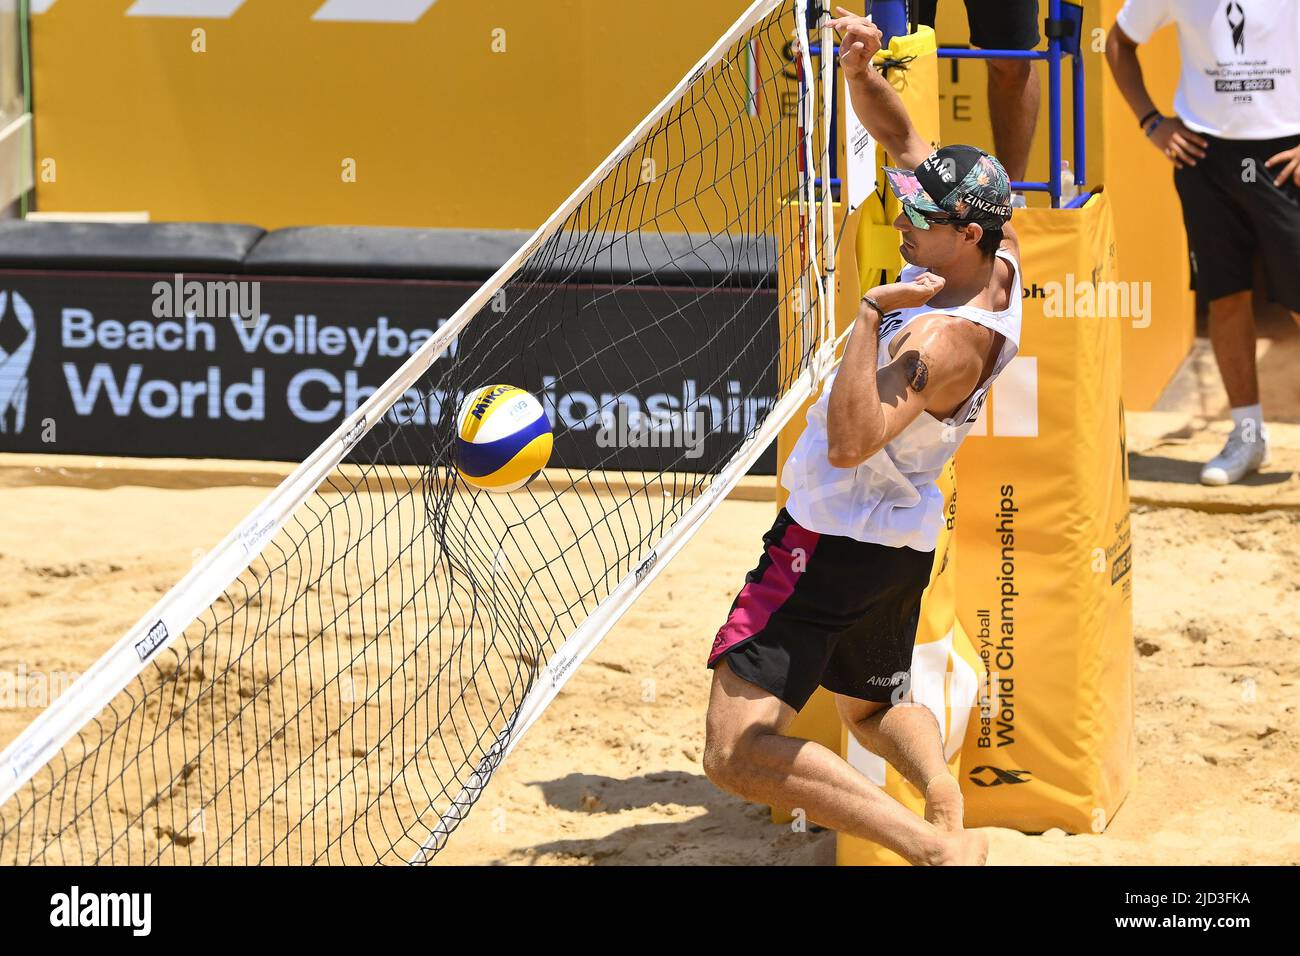 Rome, Italy. 17th June, 2022. Andre Loyola Stein/George Souto Maior  Wanderley (BRA) vs Bruno Schmidt/Saymon Barbosa Santos (BRA) during the Beach  Volleyball World Championships quarterfinals on 17th June 2022 at the Foro